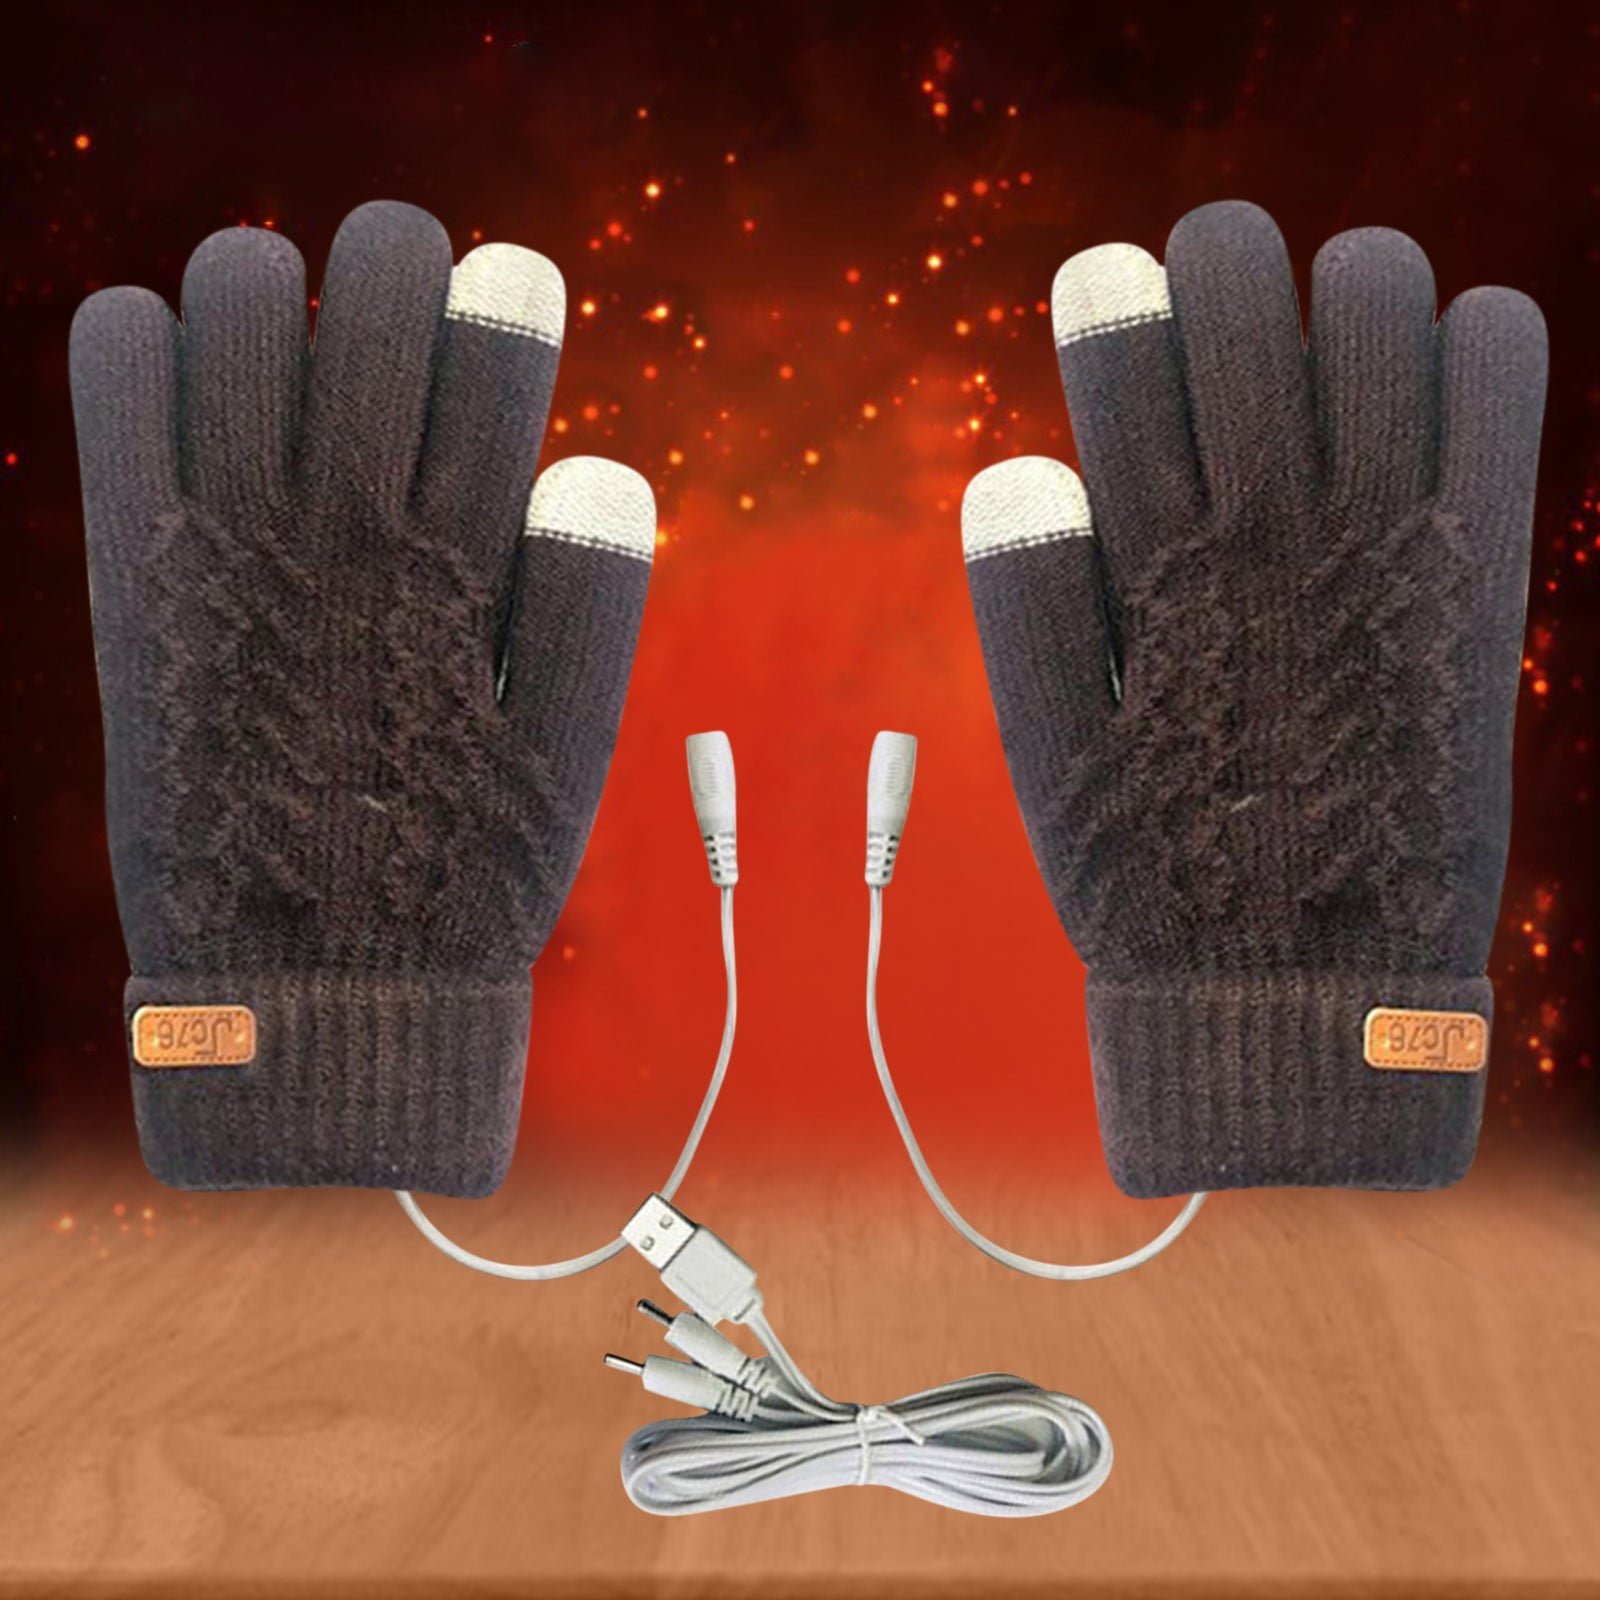 Ausyst Kitchen Gadgets USB Heated Gloves Electric Heated Mittens Women  Winter Warm Double-sided Heating Full Hands USB Rechargeable Gloves  Clearance